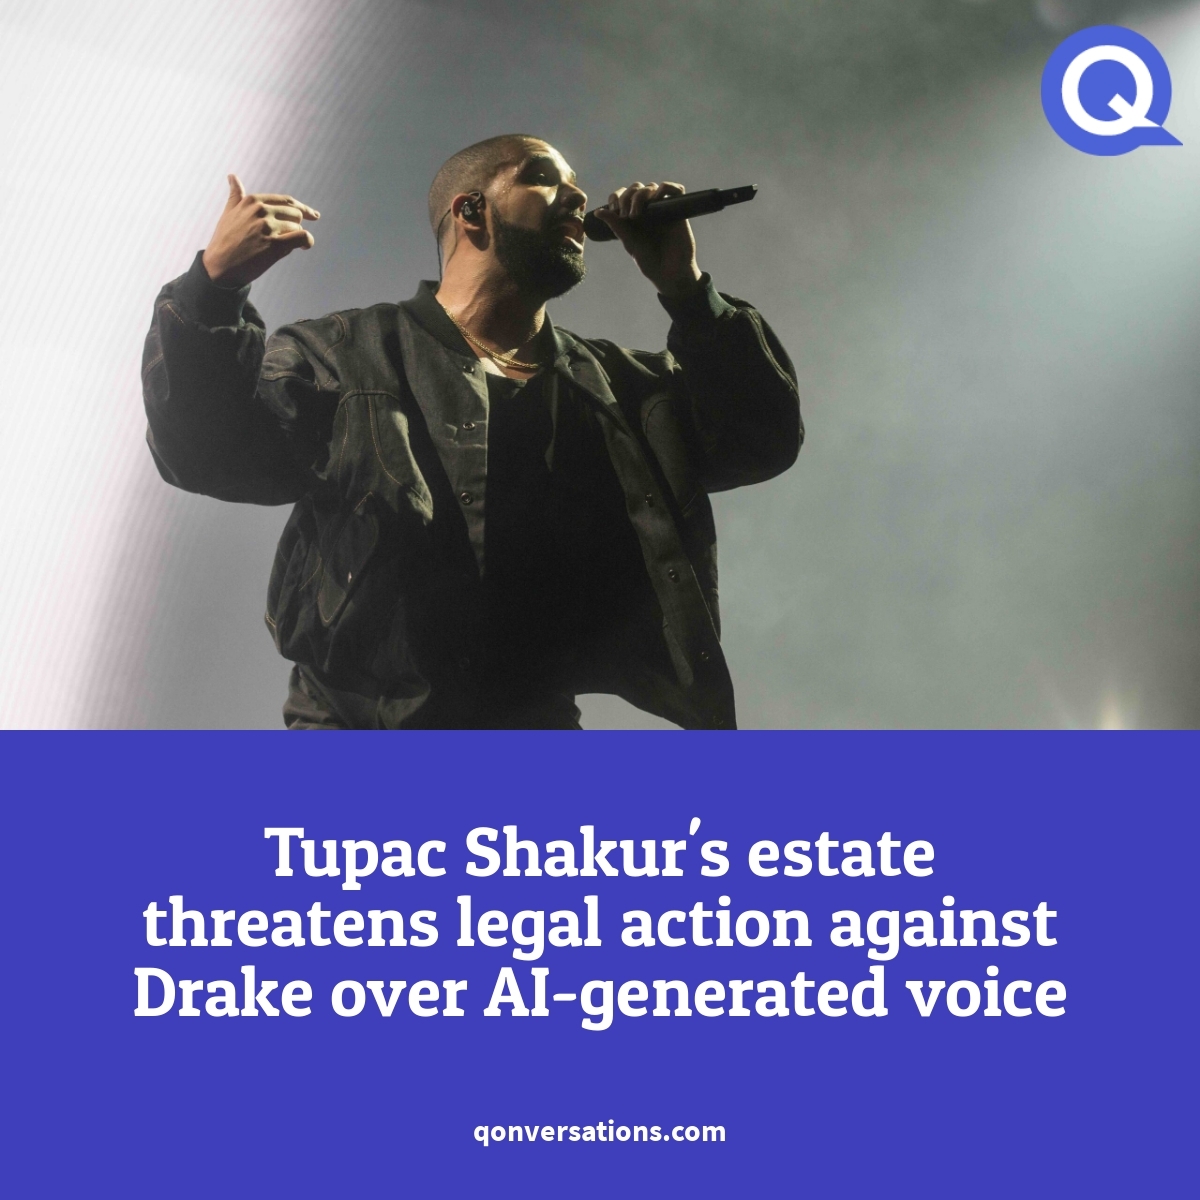 #Tupac #Drake #AI #technews Drake's recent diss track, which uses artificial intelligence to mimic Shakur's voice, has sparked controversy and drawn the ire of Shakur's estate. Find out more: qonversations.com/tupac-shakurs-…